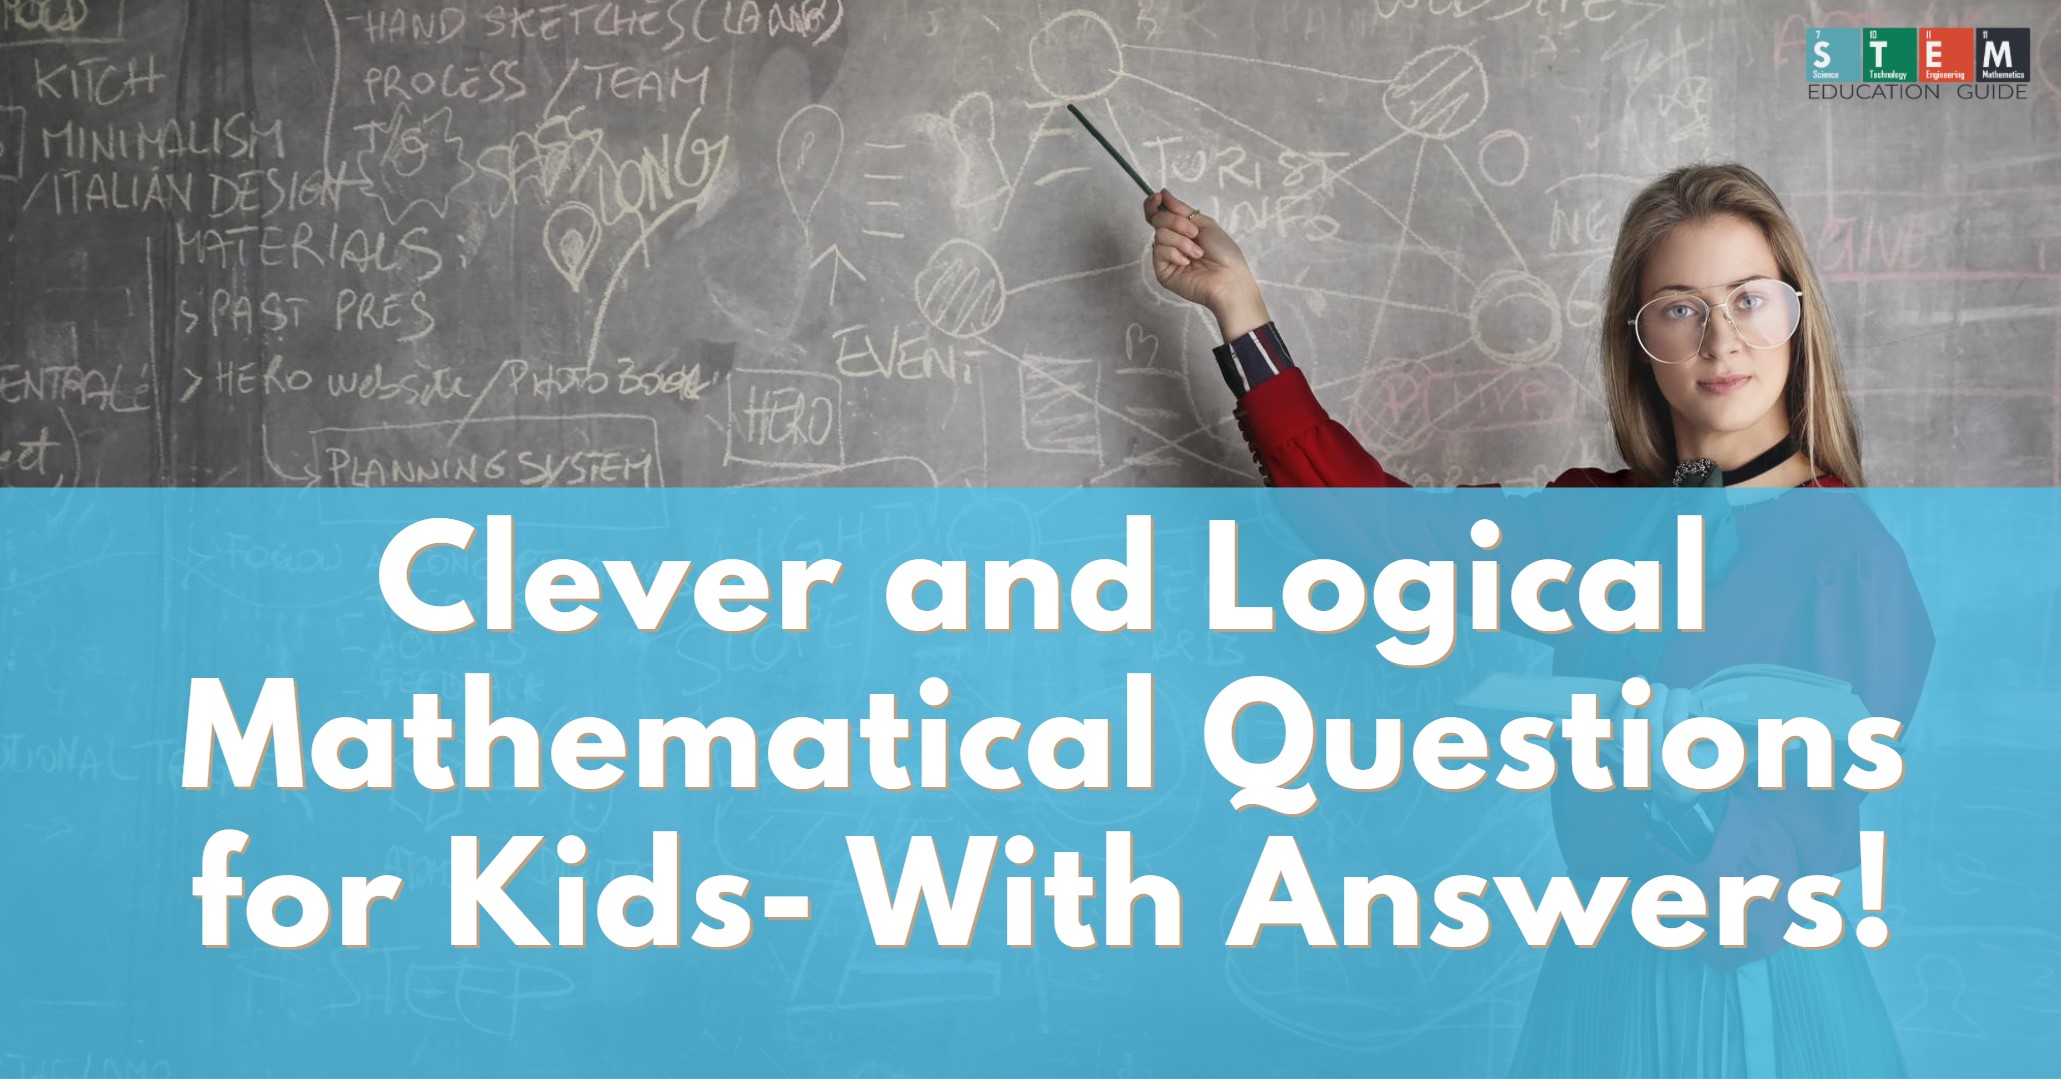 Clever and Logical Mathematical Questions for Kids- With Answers